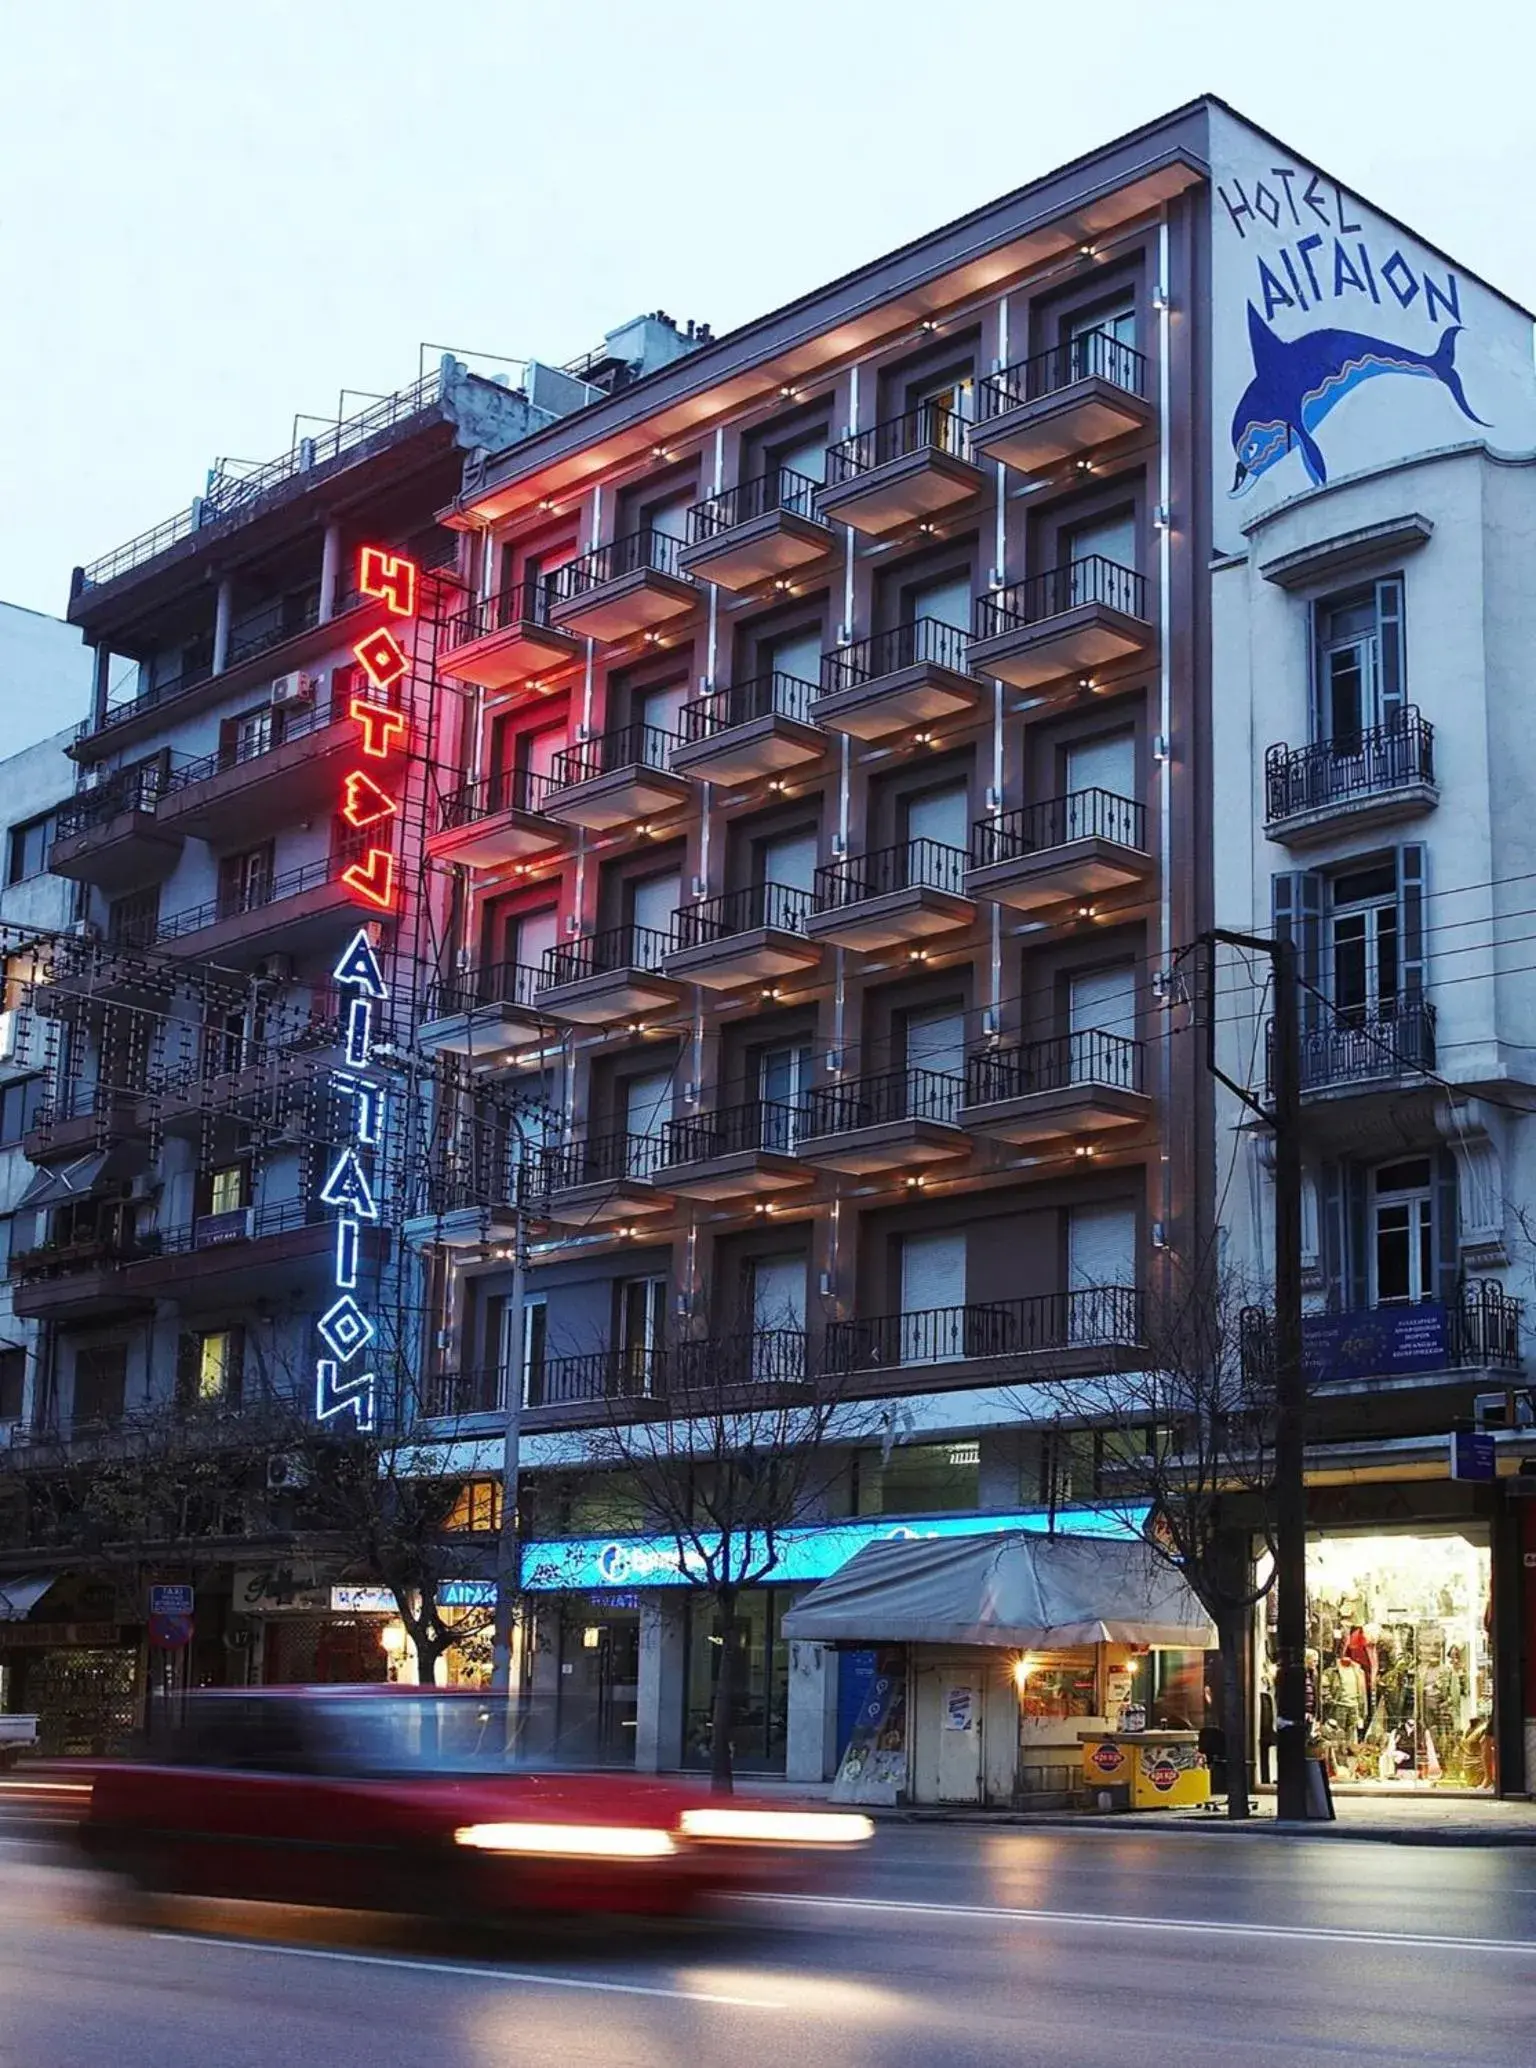 Property building in Aegeon Hotel